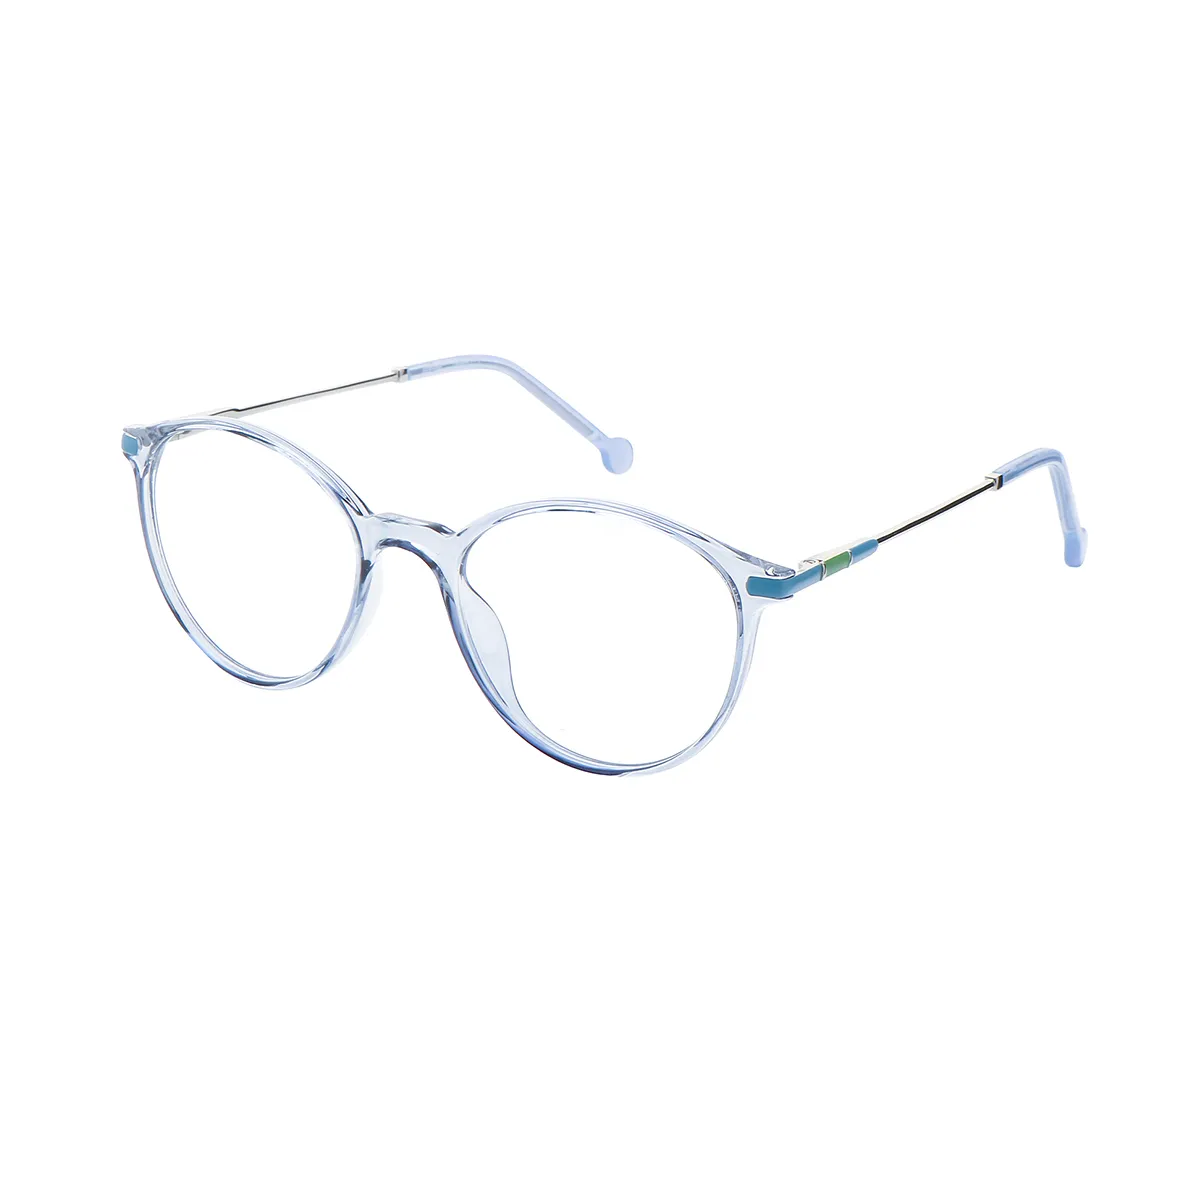 Fashion Oval Blue Glasses for Women